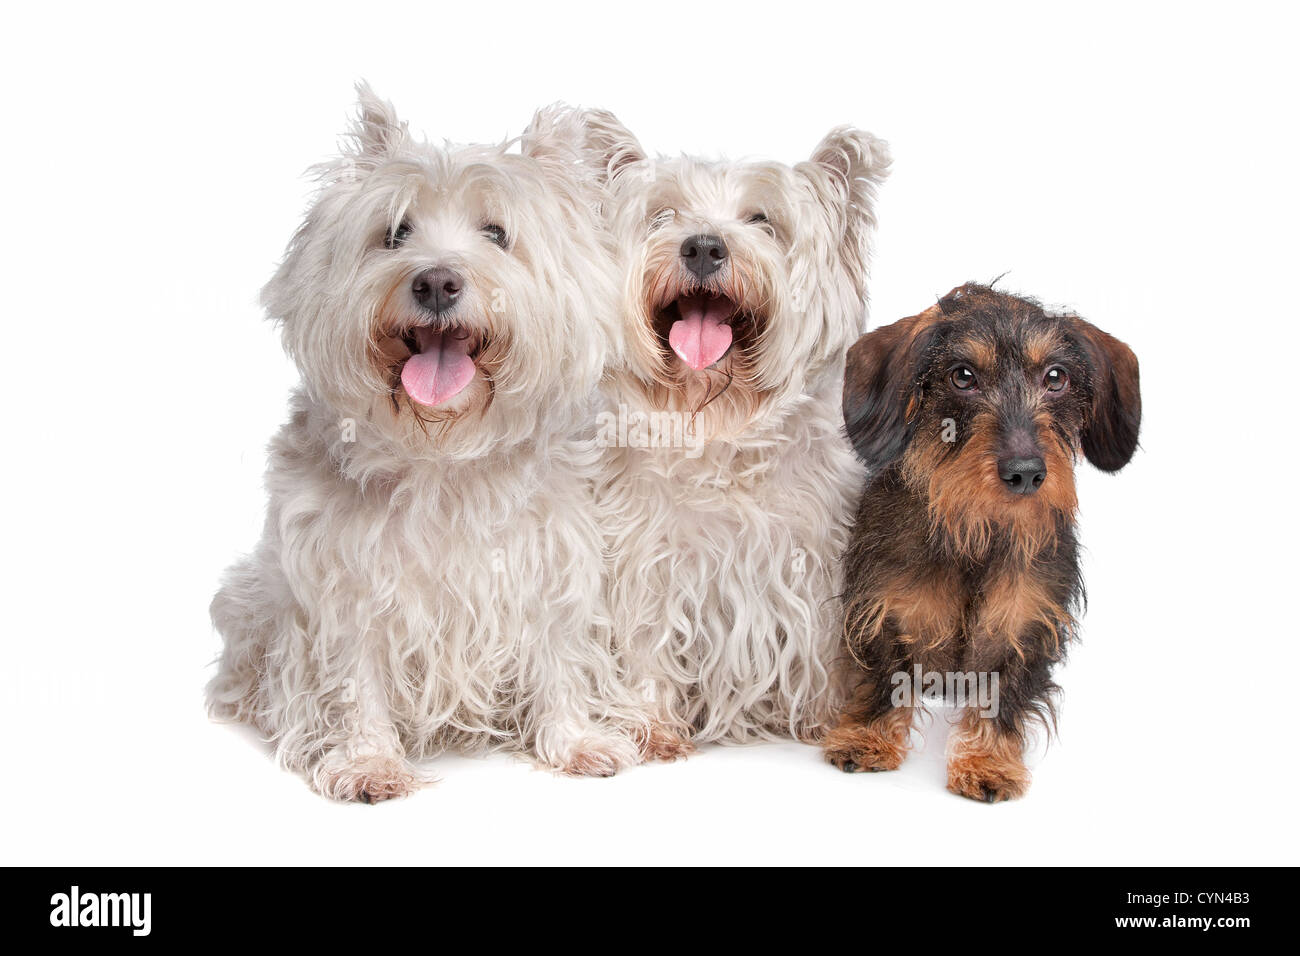 two west highland white terrier and a wire haired dachshund in front of a white background Stock Photo